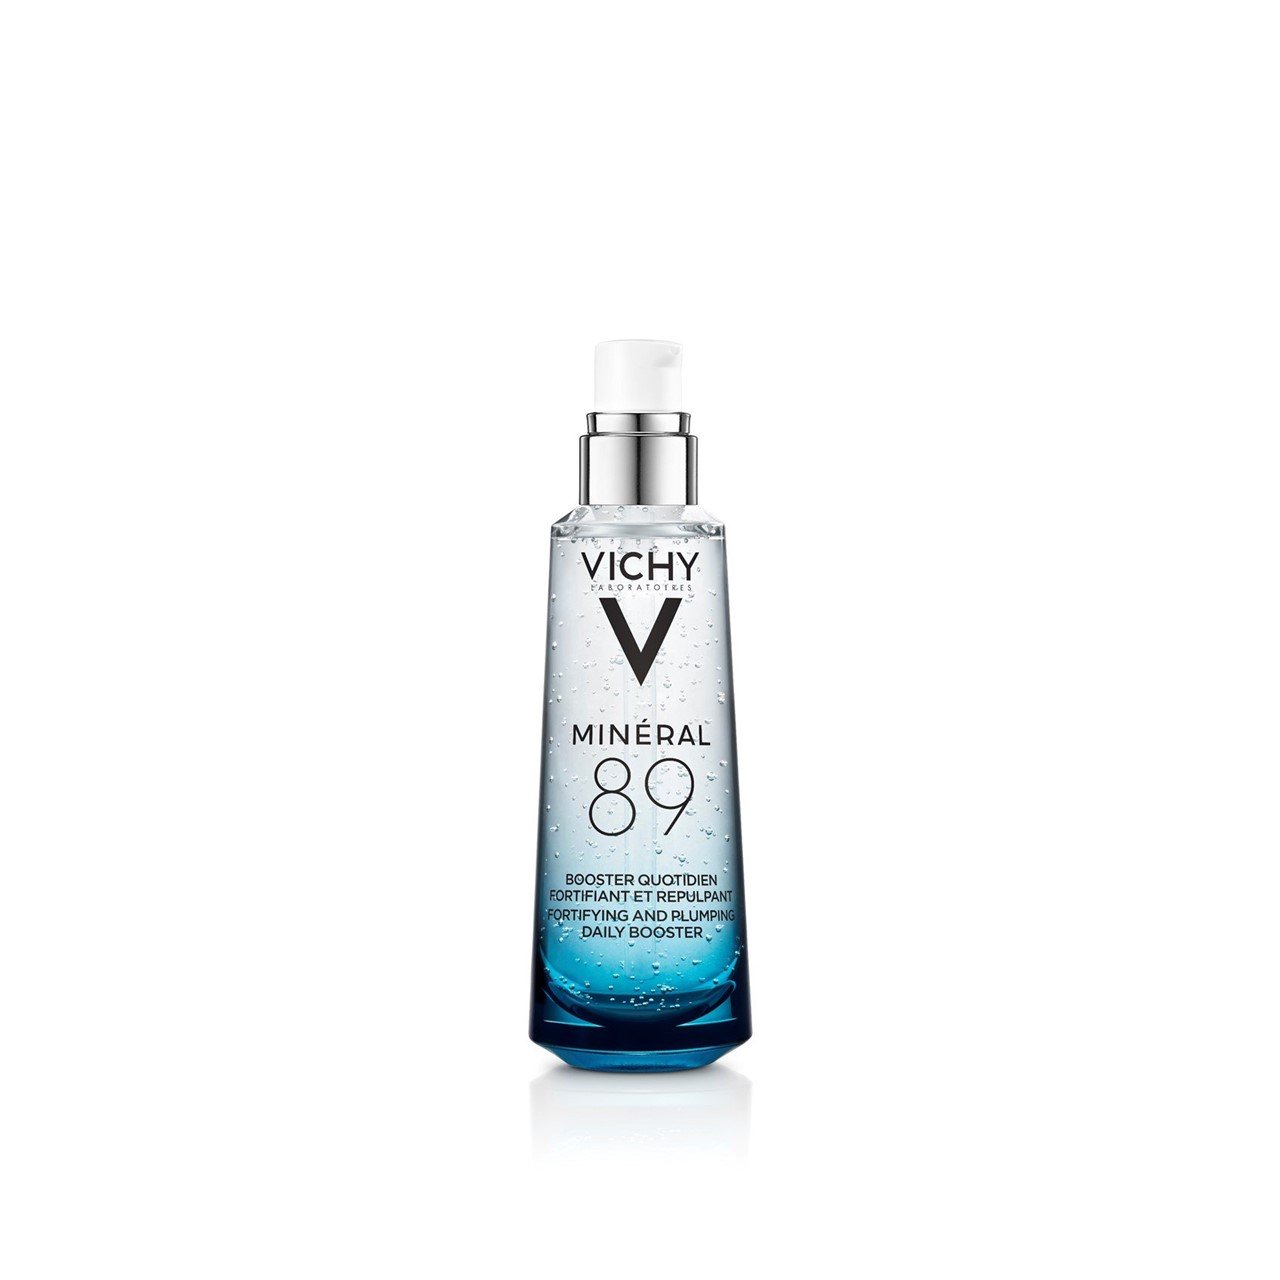 Vichy Minéral 89 Fortifying and Plumping Daily Booster 75ml